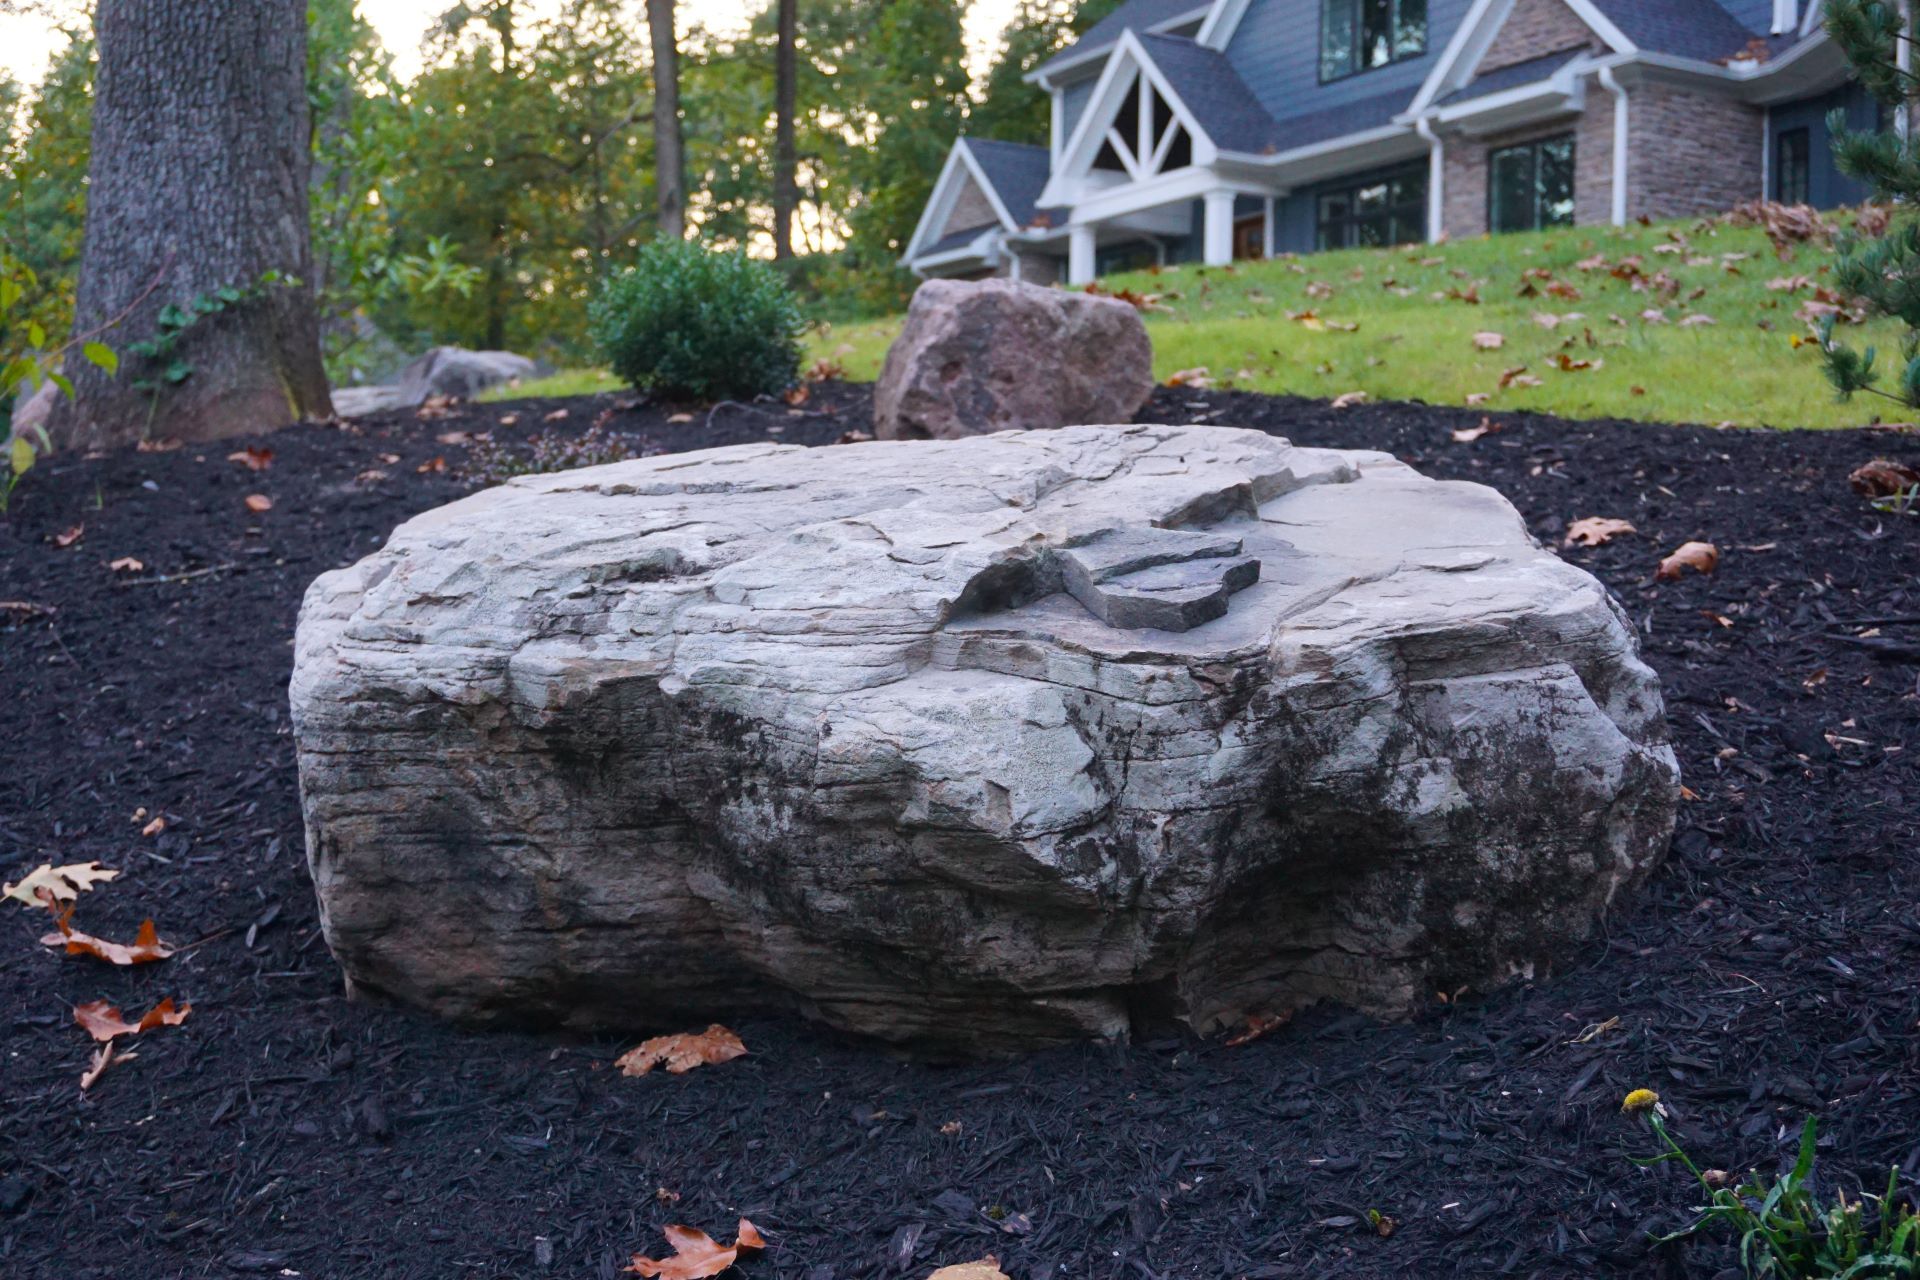 We have a great selection of Natural Stone Boulders for sale near me in Lebanon PA. We Deliver Natural Stone to Lebanon, Annville, Palmyra, & Cornwall.